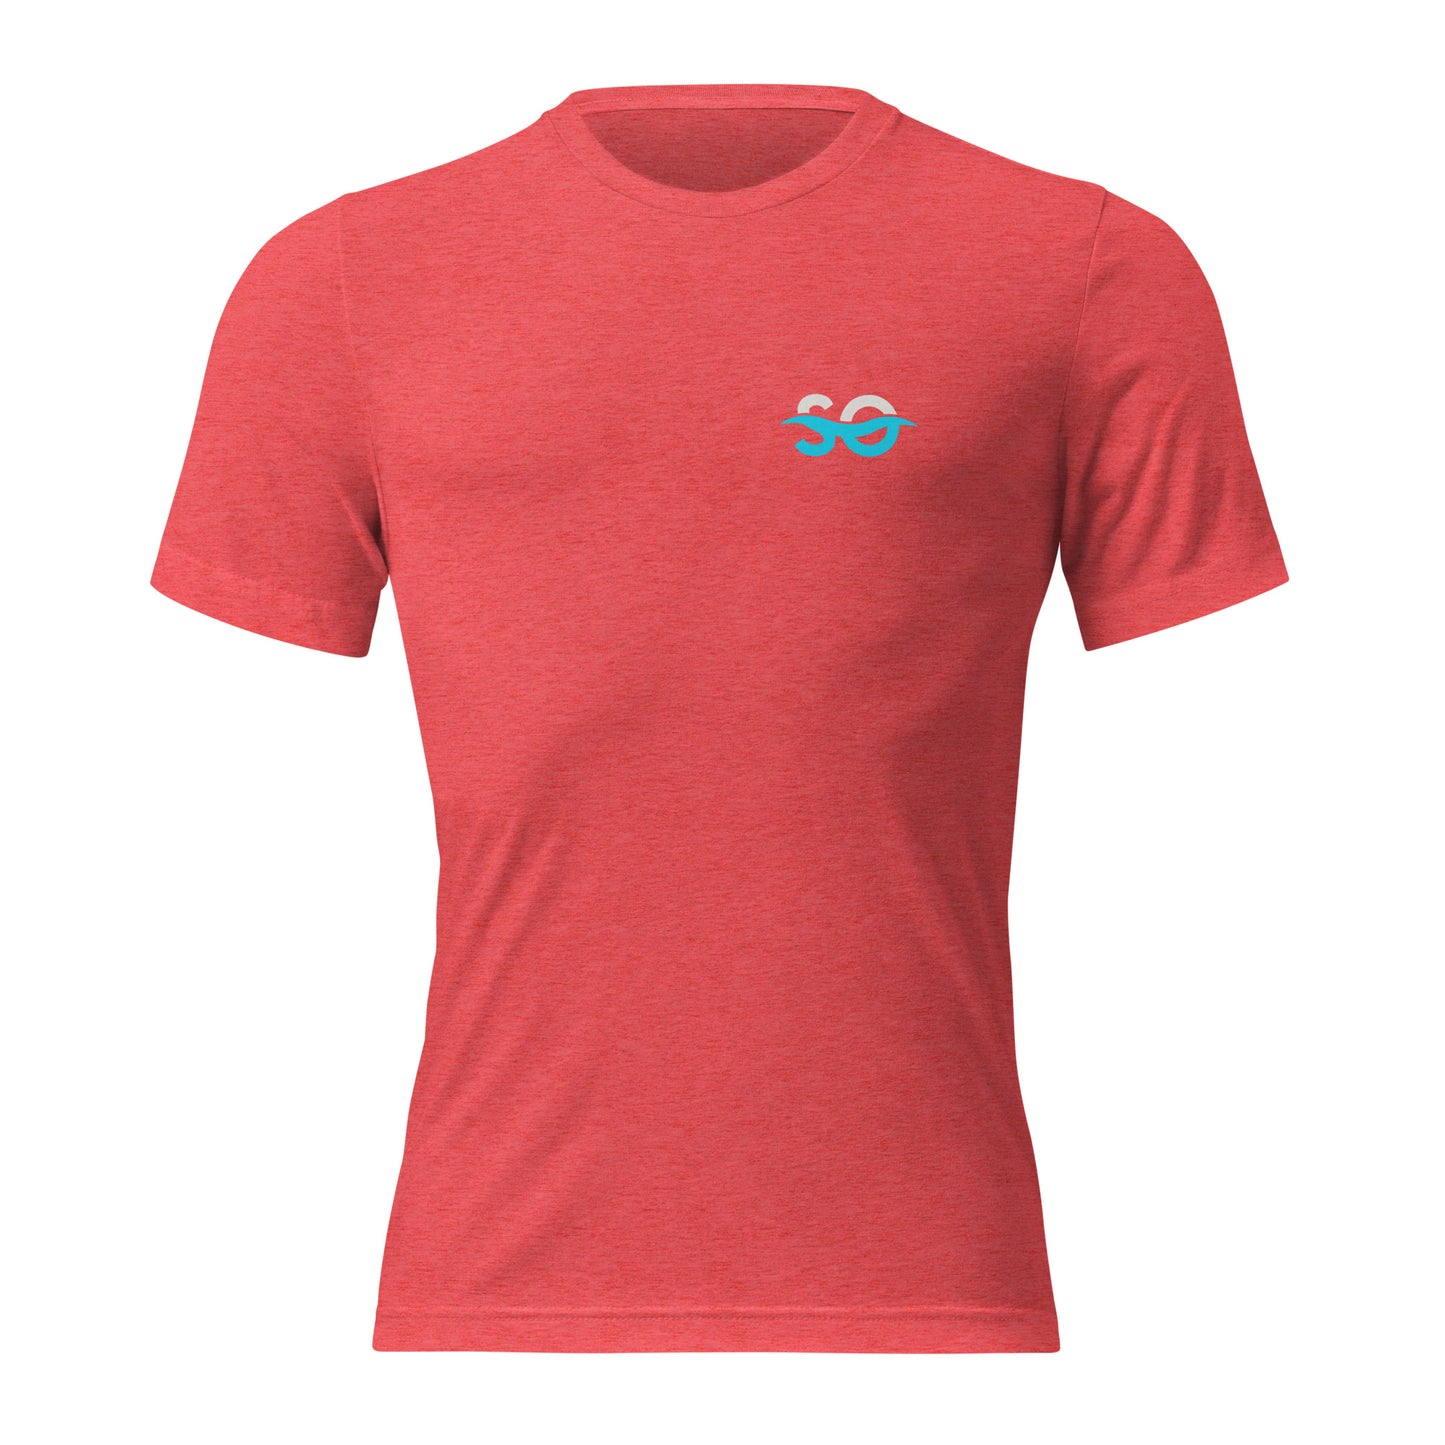 a red t - shirt with a blue logo on the chest